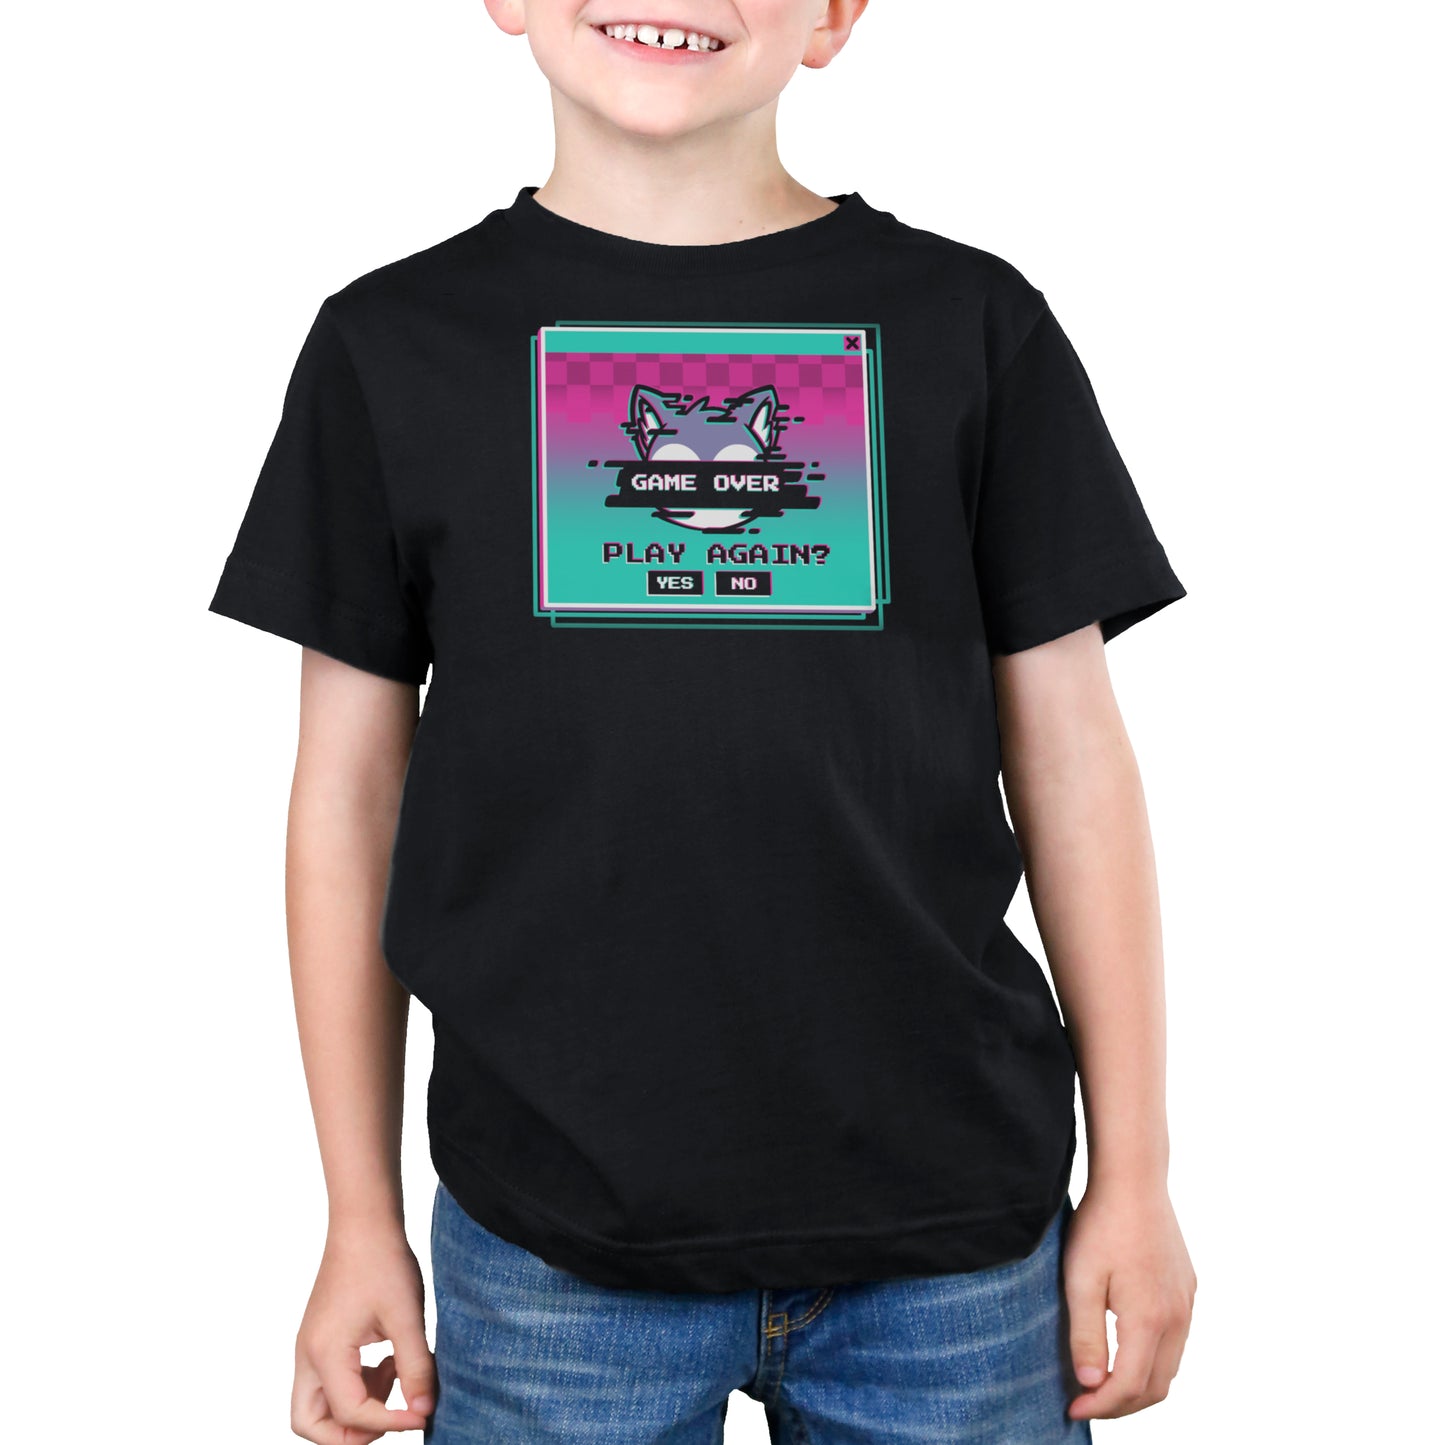 A child wearing a black Game Over, Play Again? t-shirt from monsterdigital made from super soft ringspun cotton with a colorful graphic of a cat and the text "Game Over" and "Play Again? Yes No." The unisex tee complements their slight smile as they stand with hands by their sides.